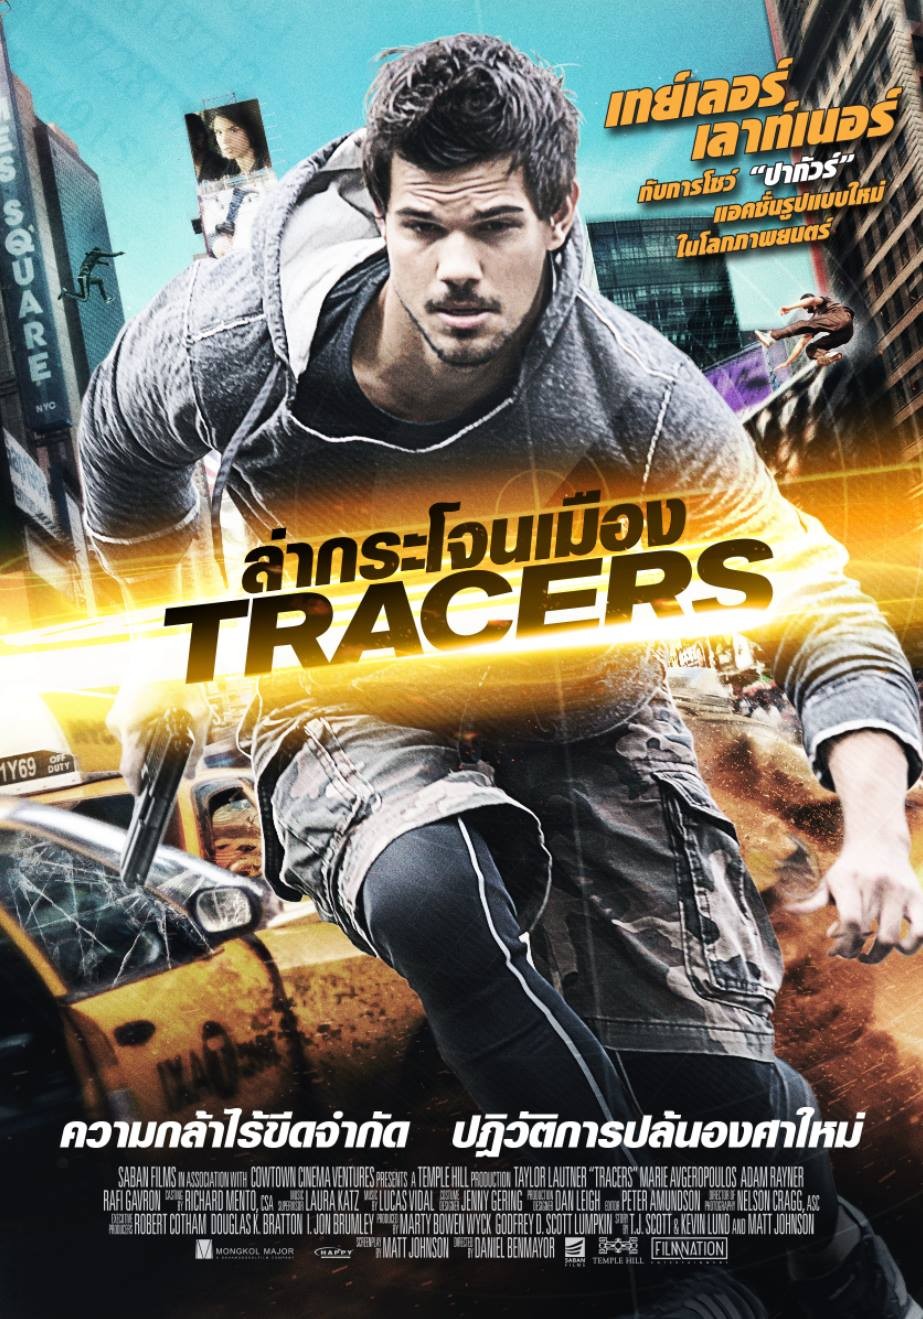 Extra Large Movie Poster Image for Tracers (#3 of 3)